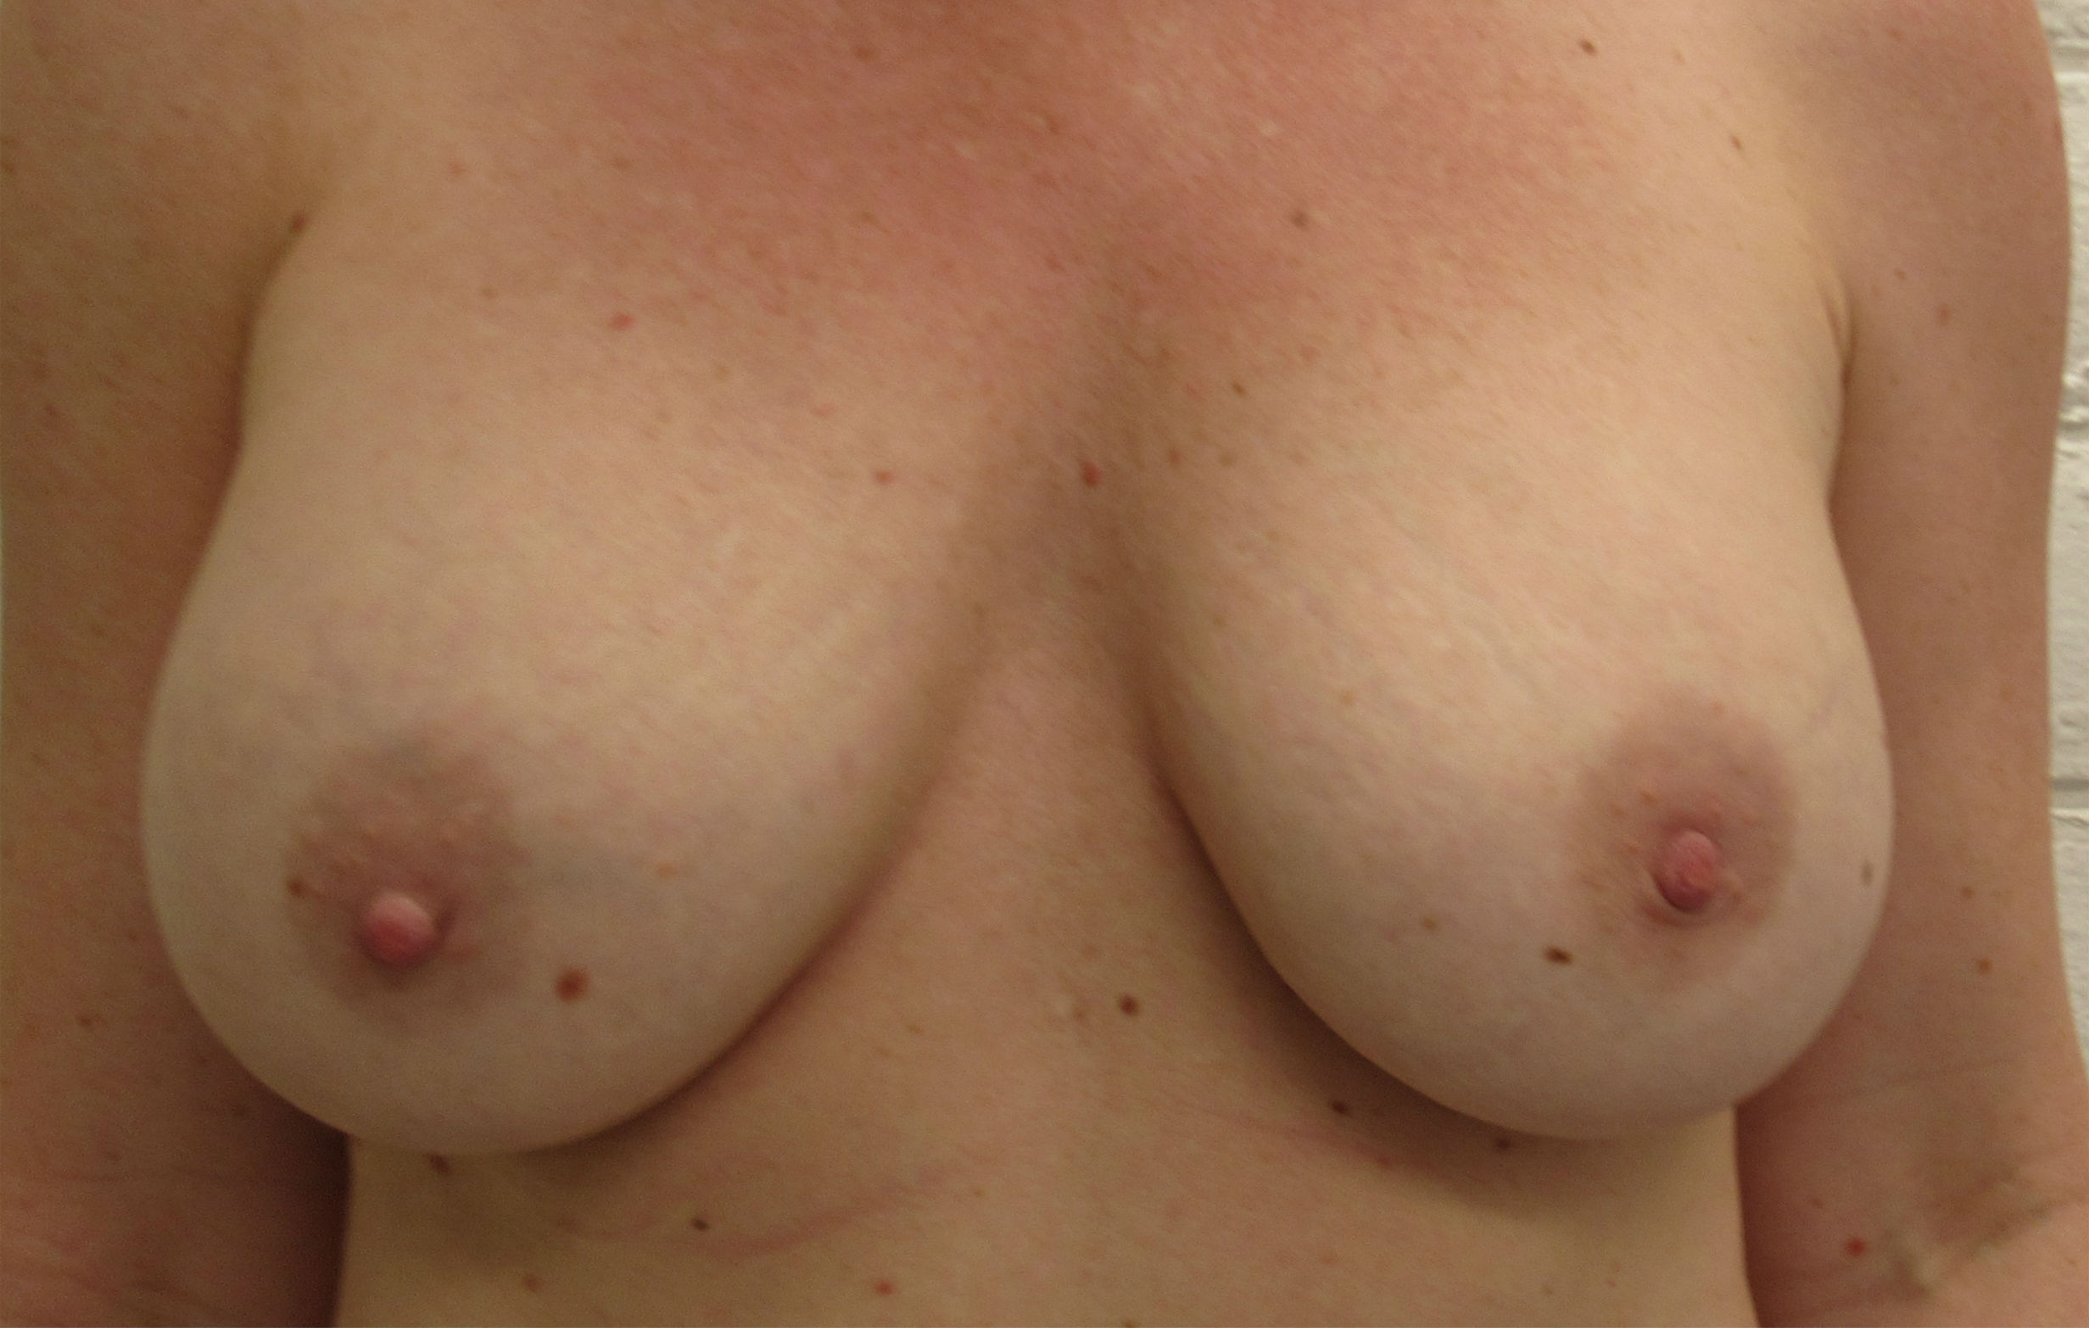 Breast Augmentation with Fat Grafting before and after photos by Hughes Plastic Surgery in Los Angeles, CA